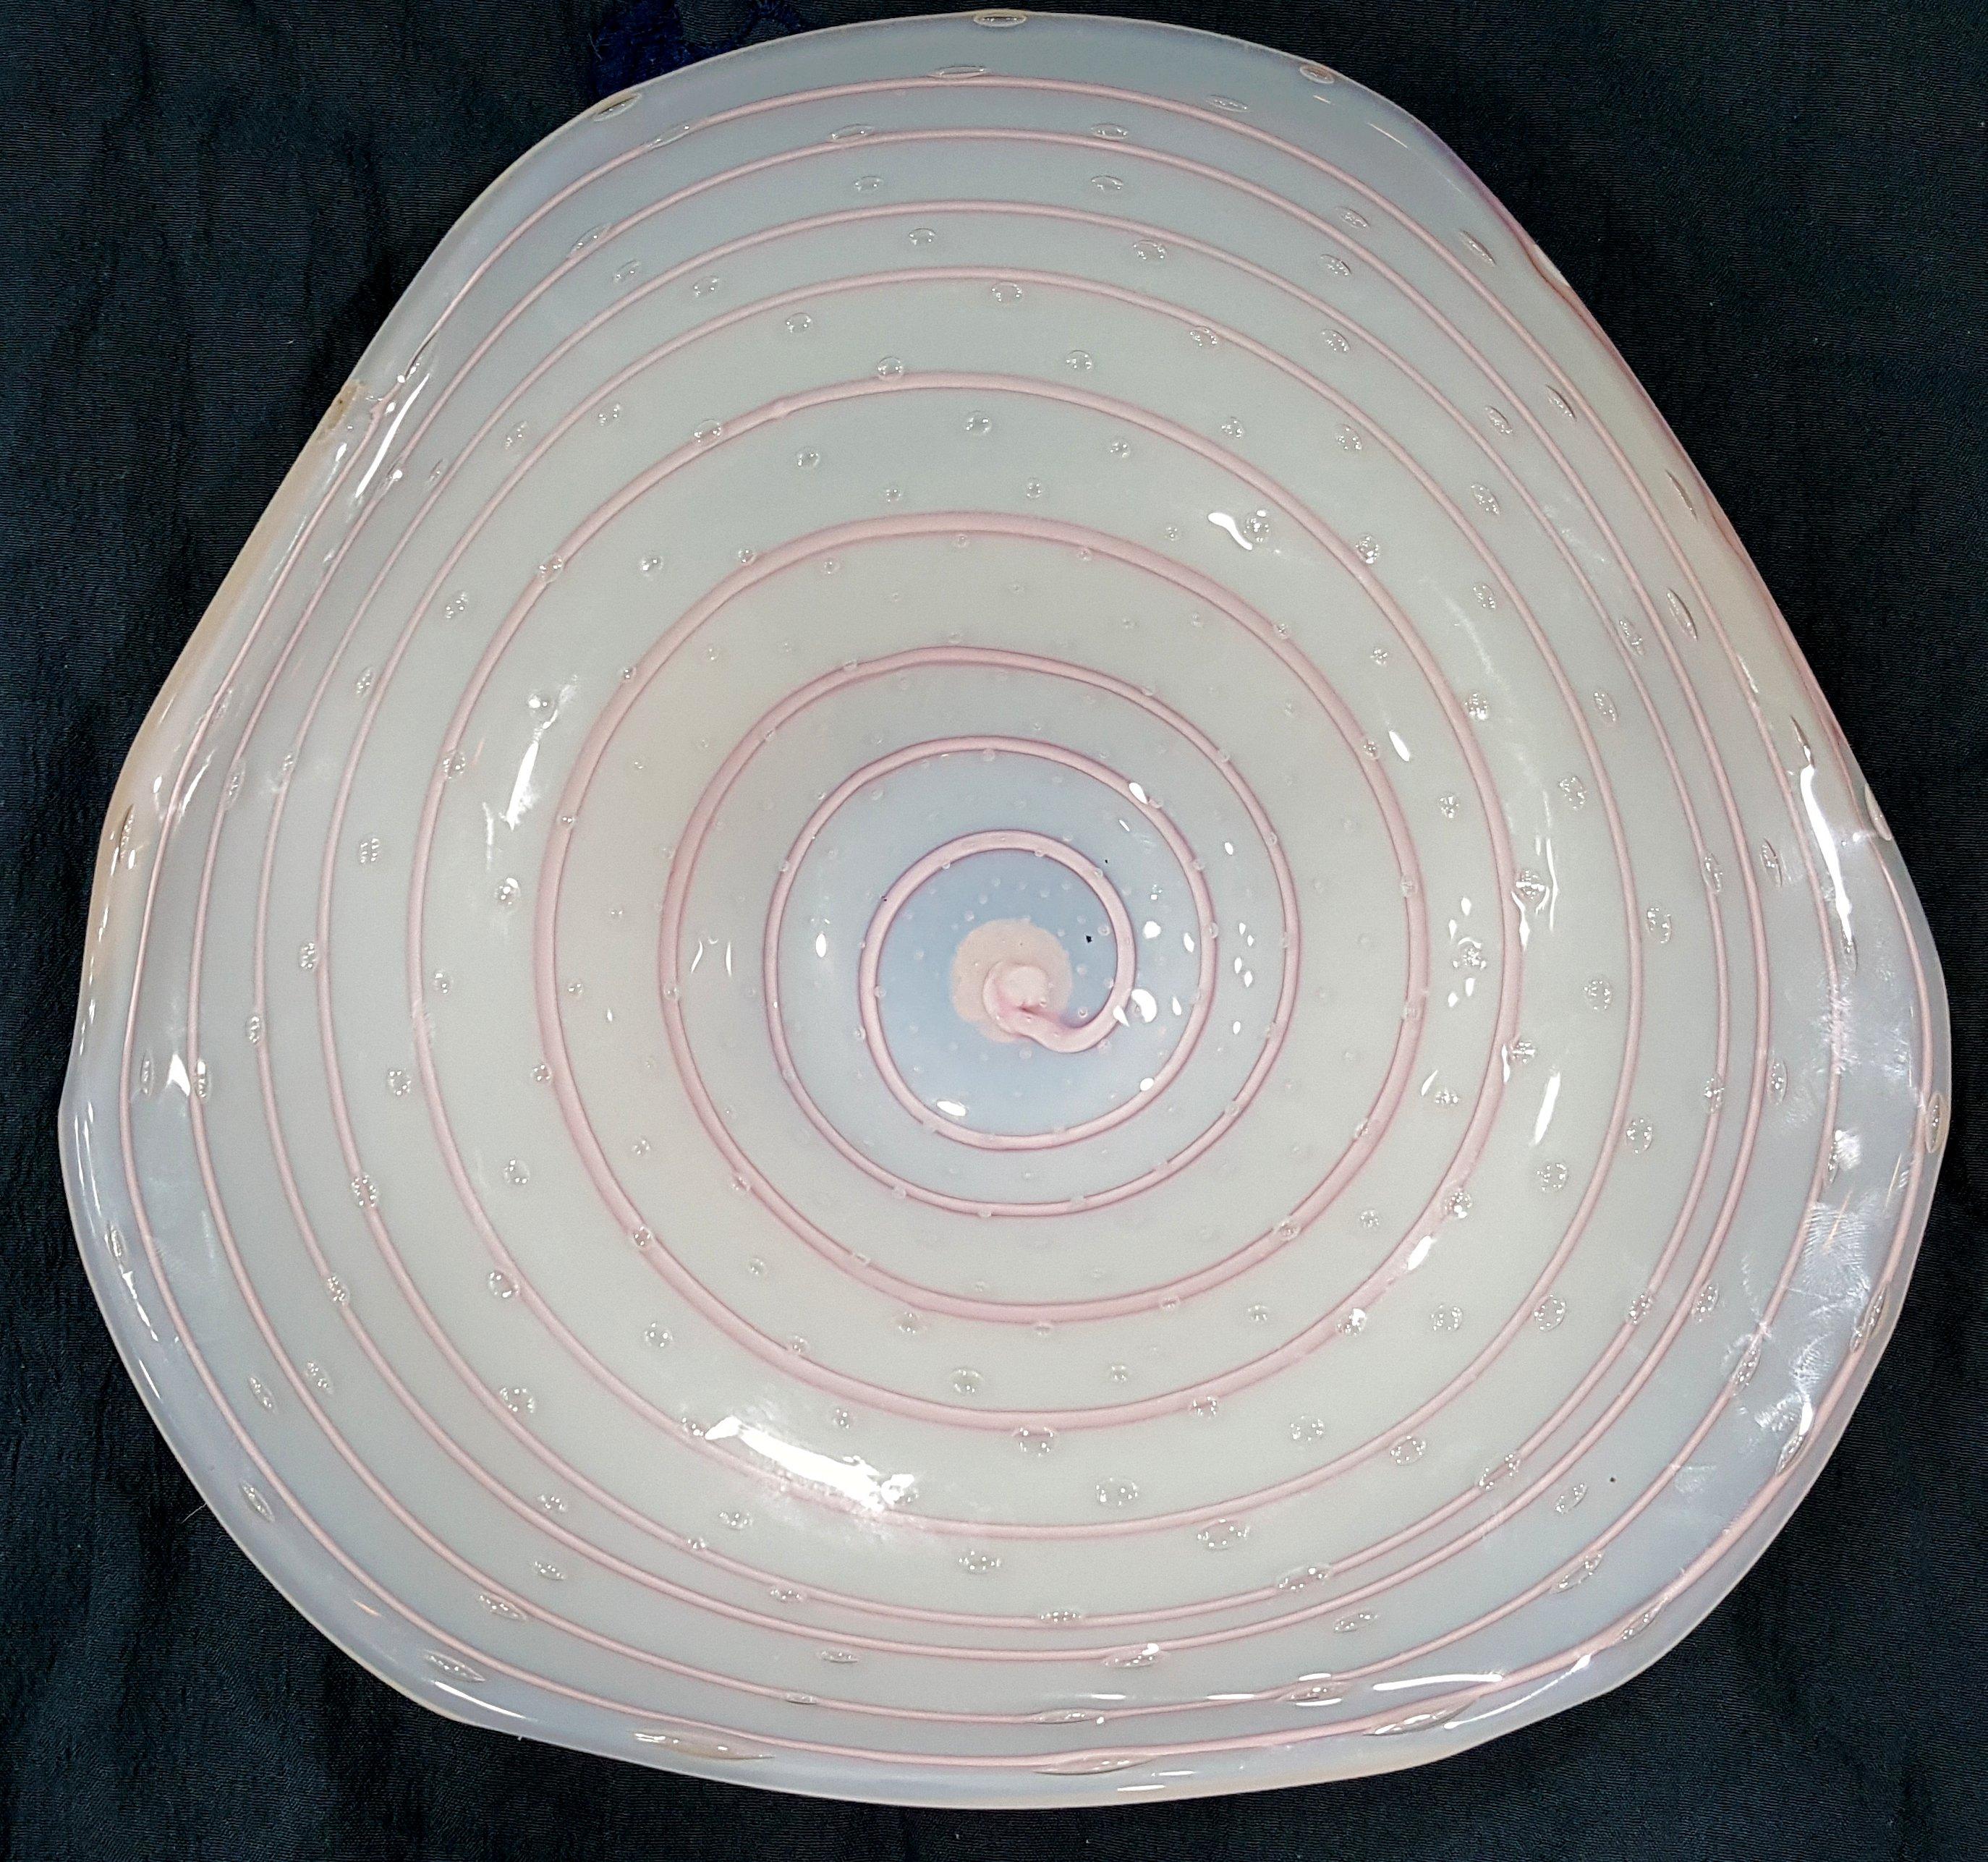 Murano Glass Centerpiece, Opaline White w/Pink Optic Swirl & Bullicante - Fratelli Toso (assumed). This piece still bears a large part of the original Murano Glass Made in Italy label on the underside, providing evidence of origin. There is one spot